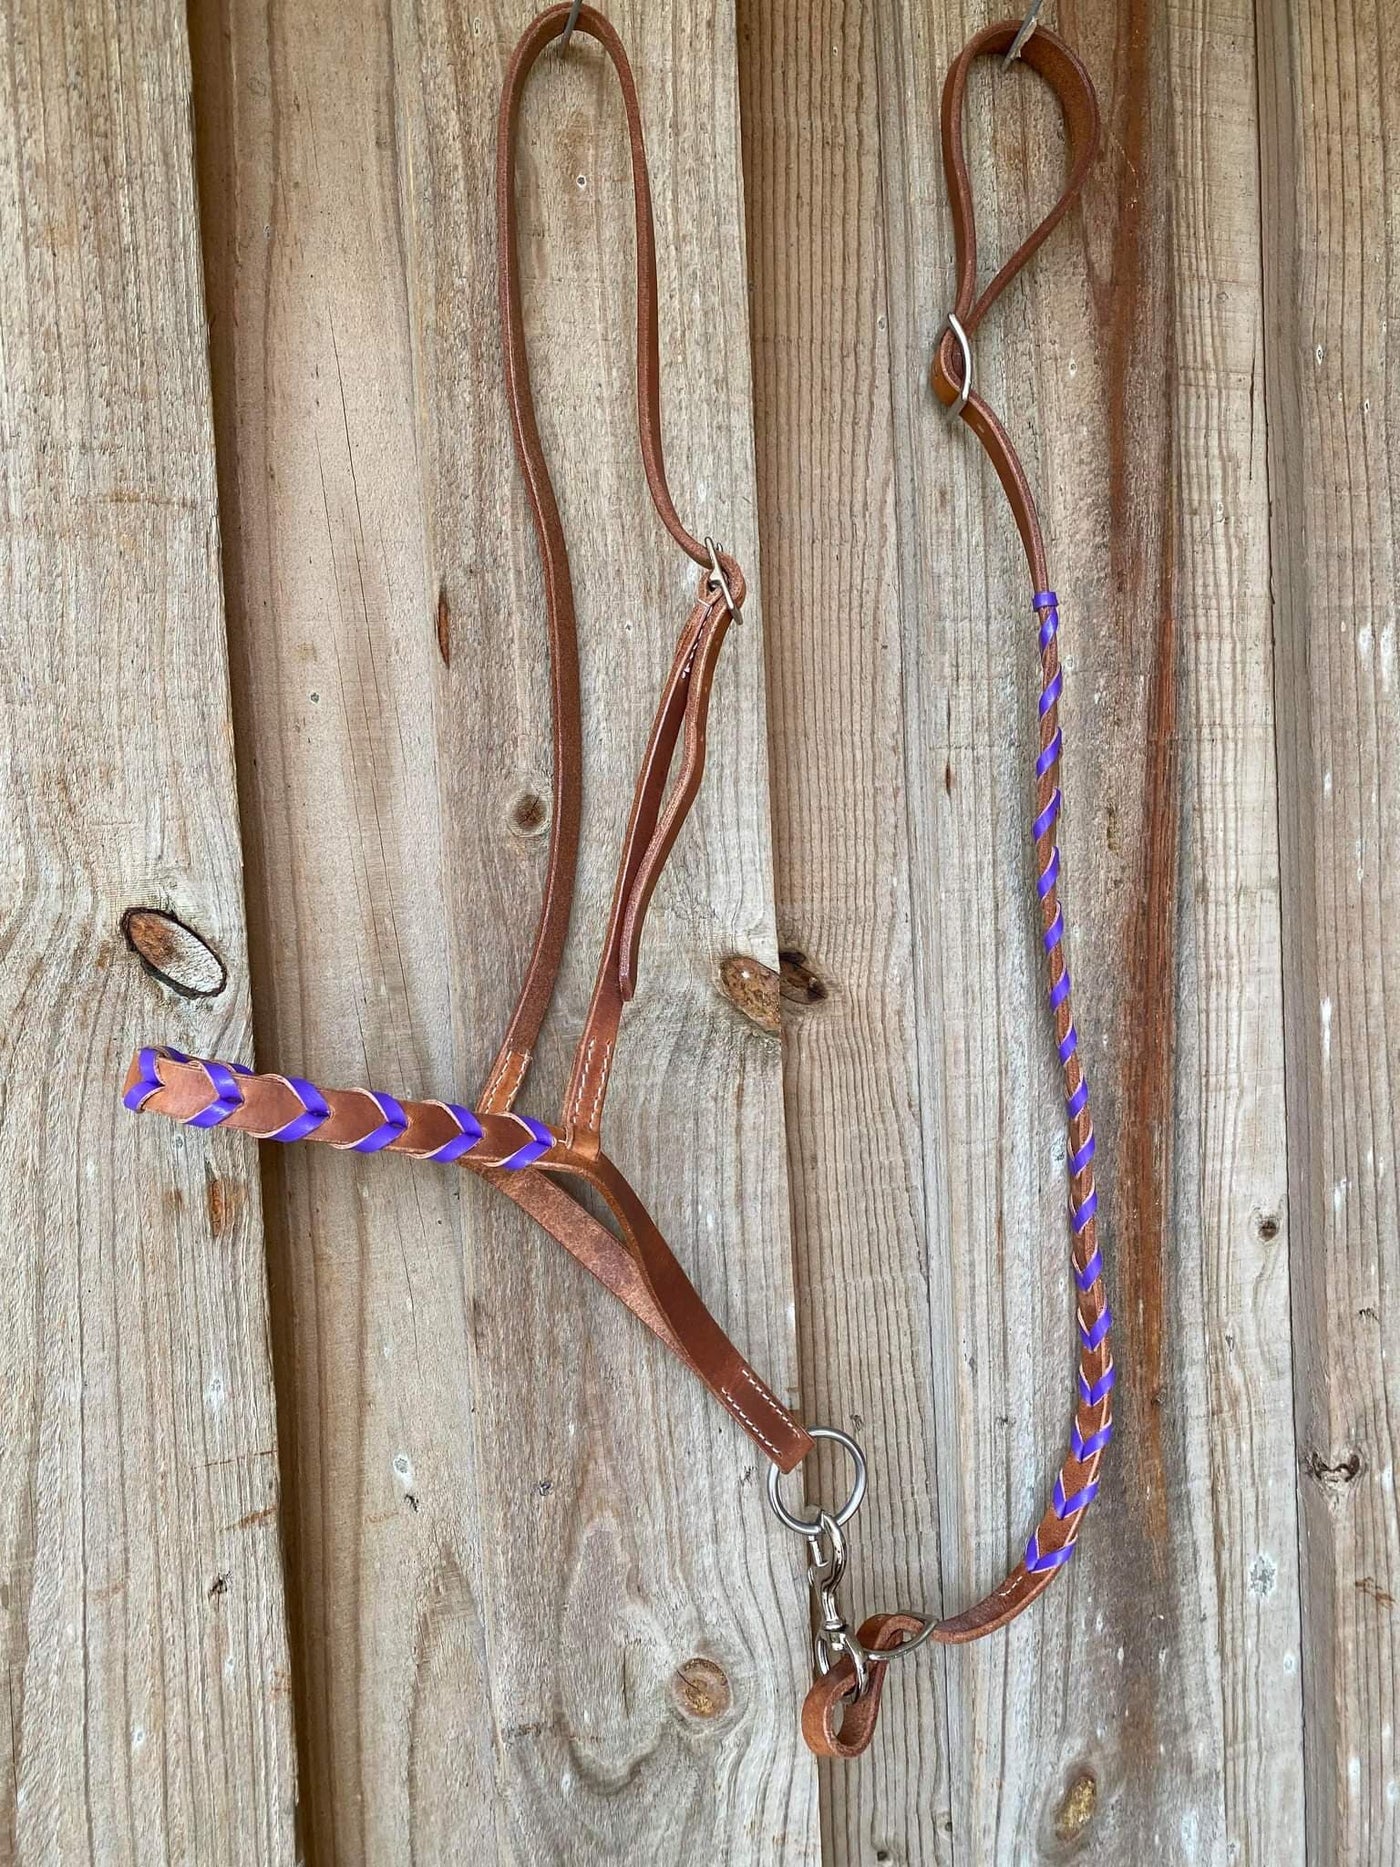 Noseband - Harness Leather Laced Purple Tie Down Set